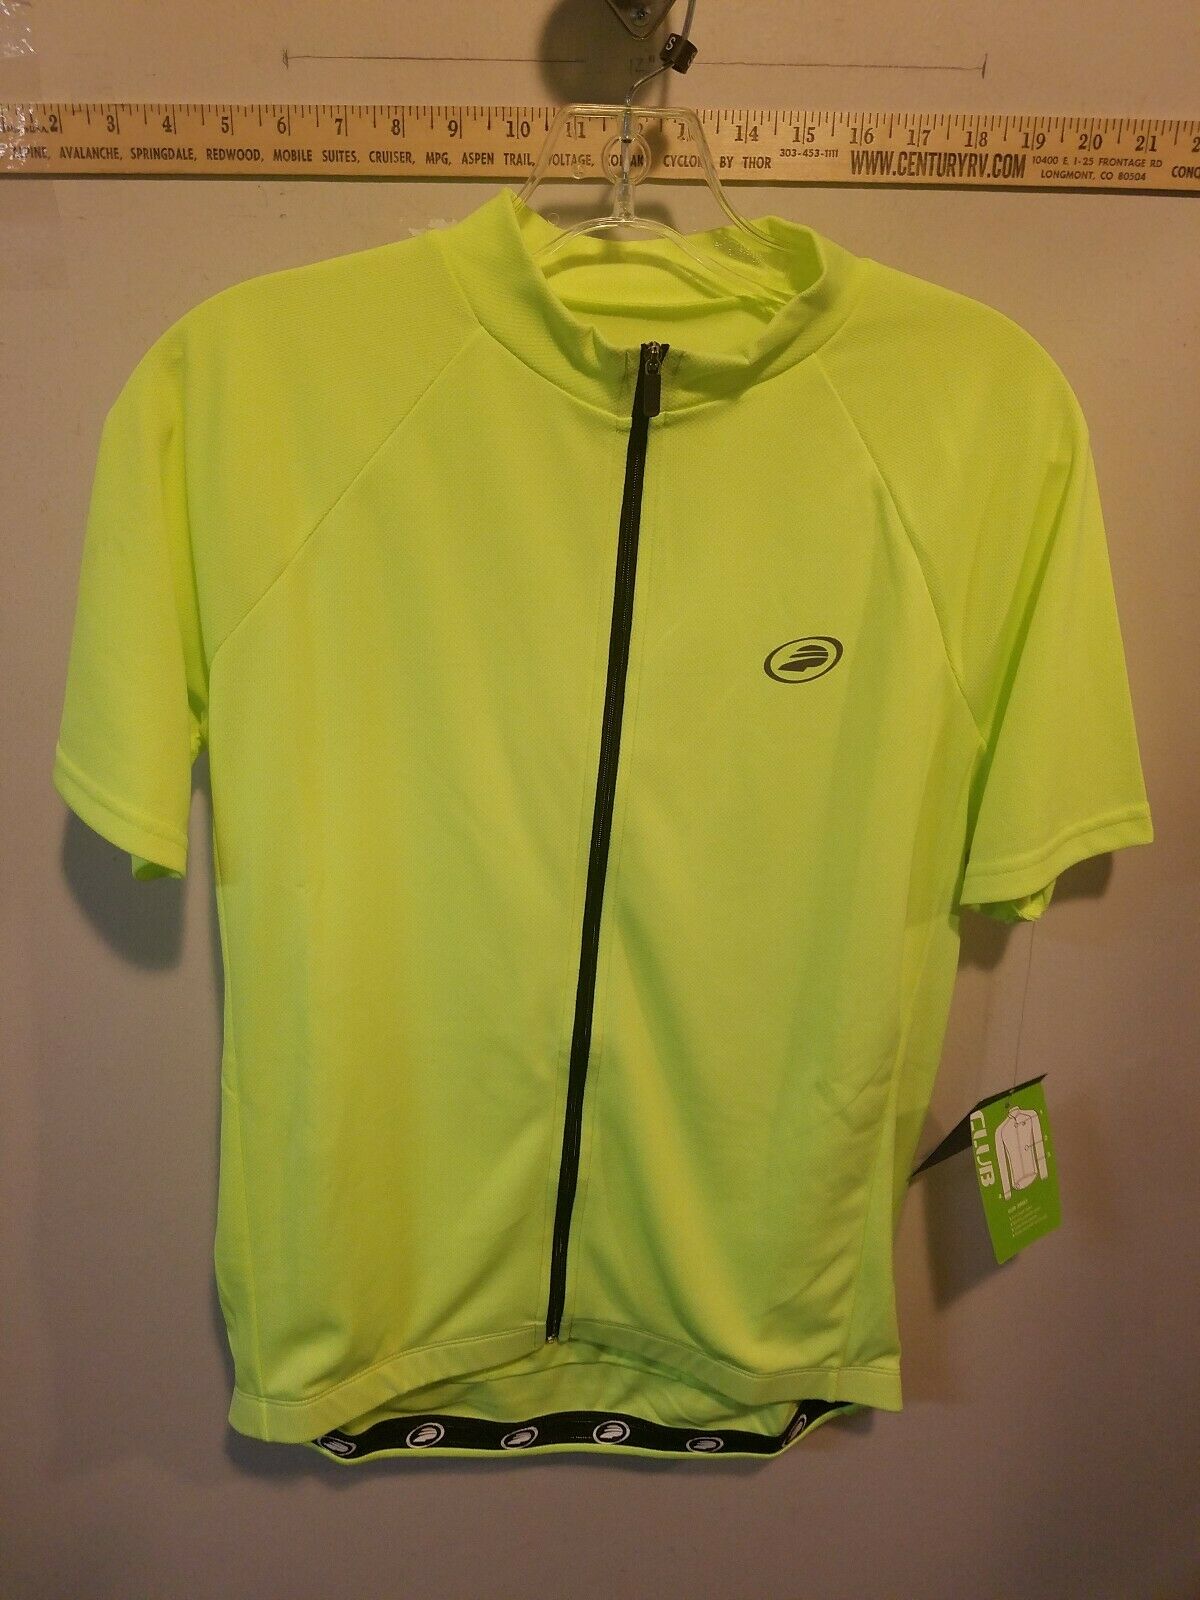 Performance Club Cycling Jersey Yellow New Clearance